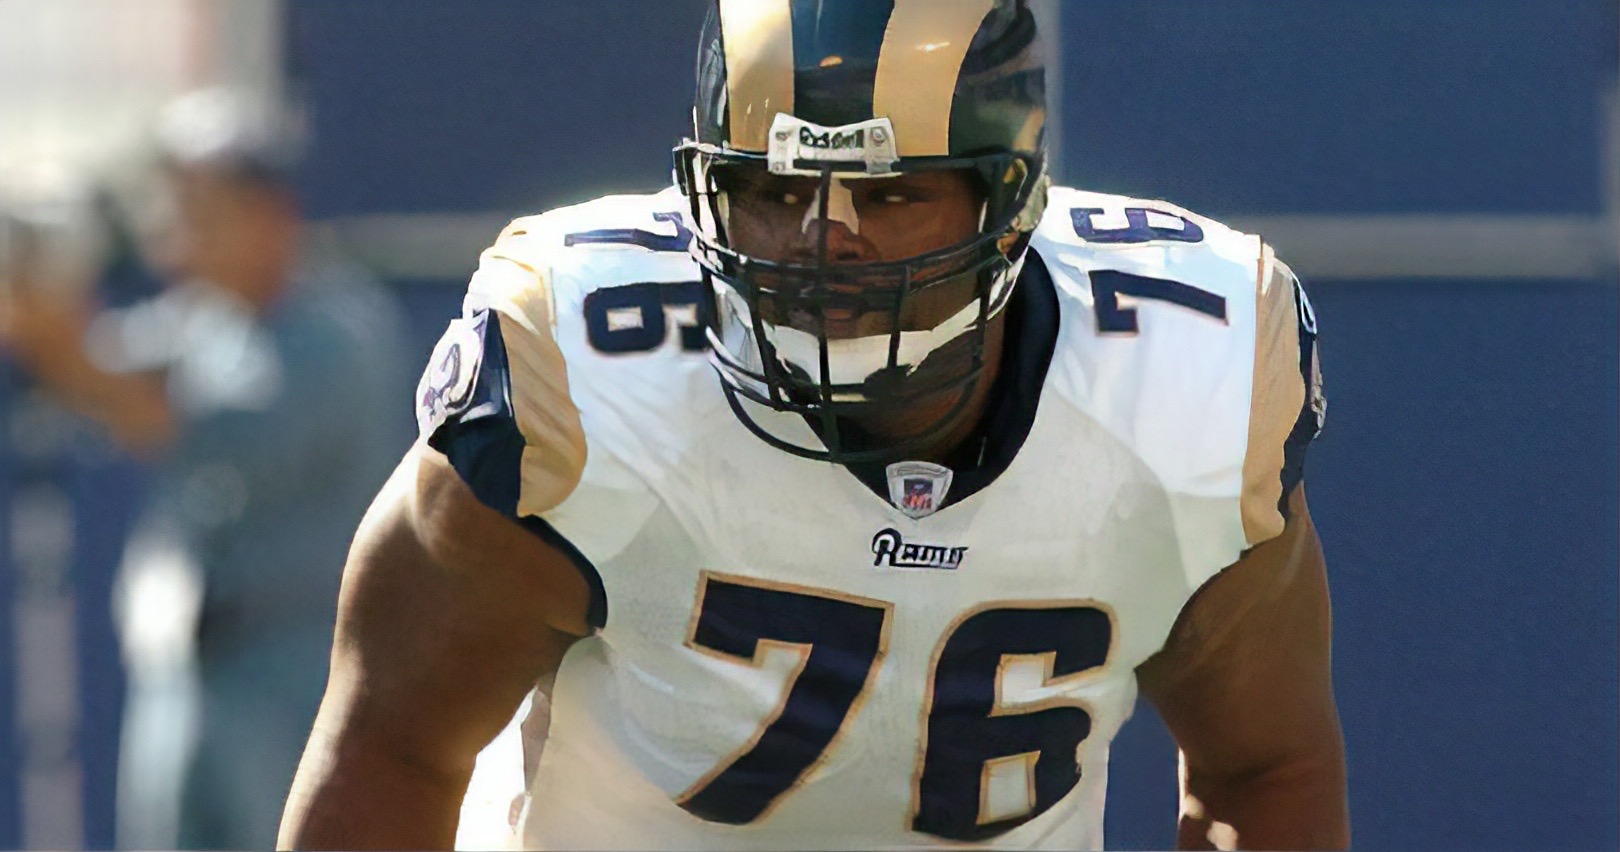 The LA Rams allowing a 7th round pick to wear No. 76 is a slap in the face of Orlando Pace | ArchCity.Media